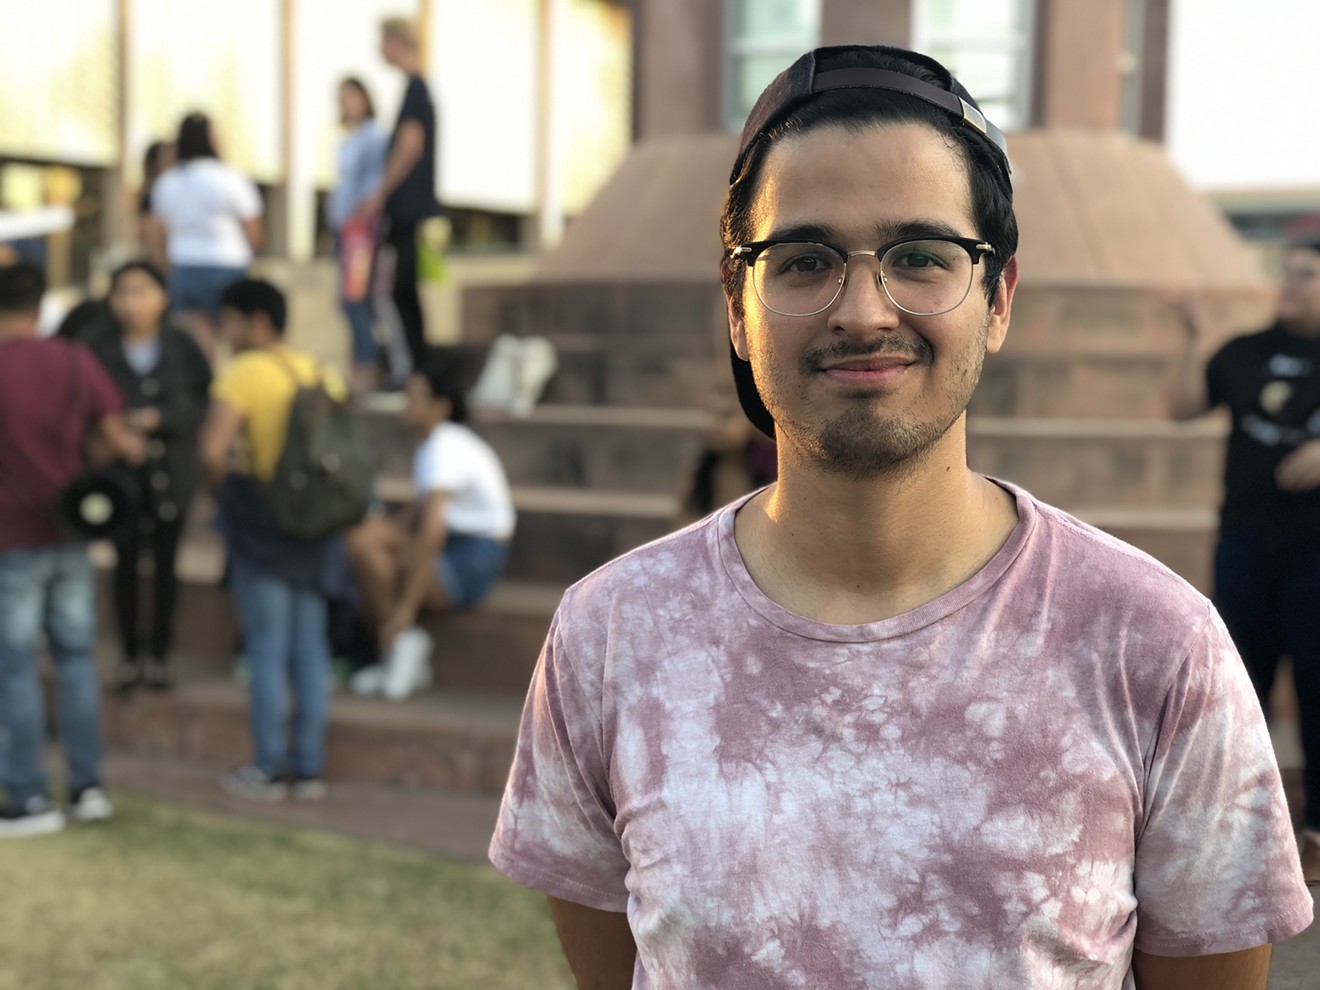 Mario Mosqueda, a Dreamer from Mexico and ASU biomedical engineering student, came to the United States when he was 6.